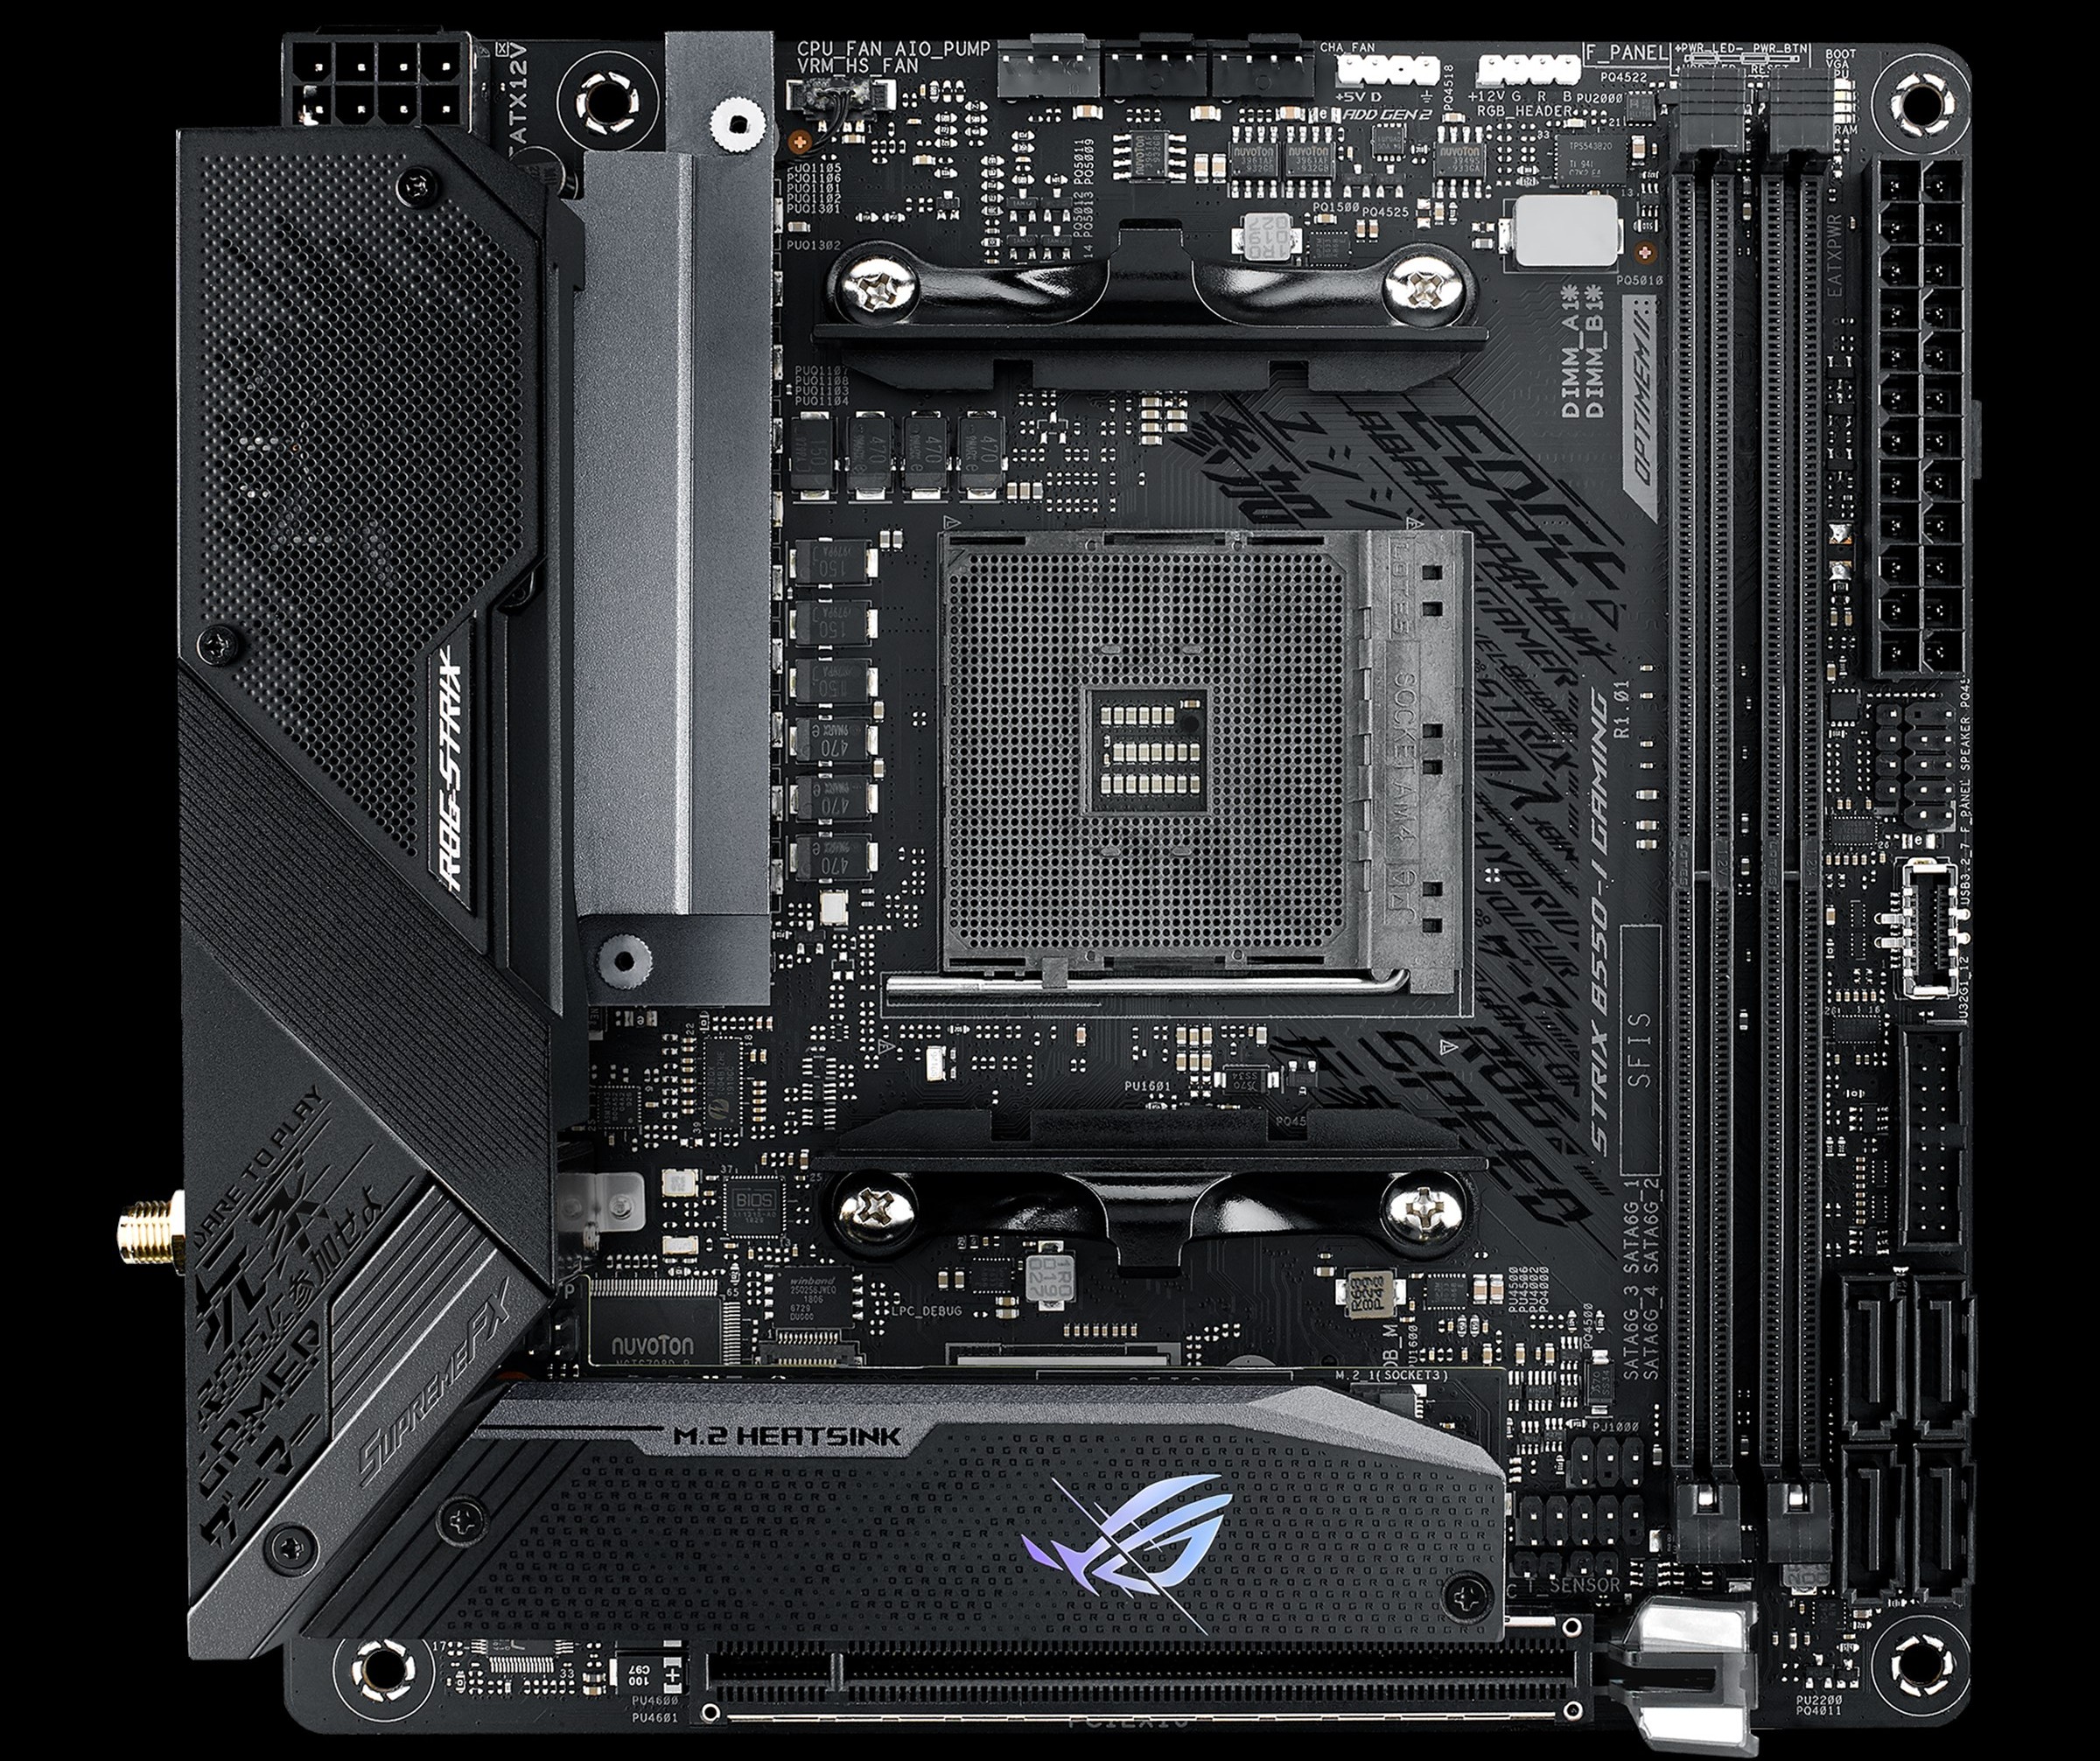 Asus Rog Strix B550 I Gaming The Amd B550 Motherboard Overview Asus Gigabyte Msi Asrock And Others